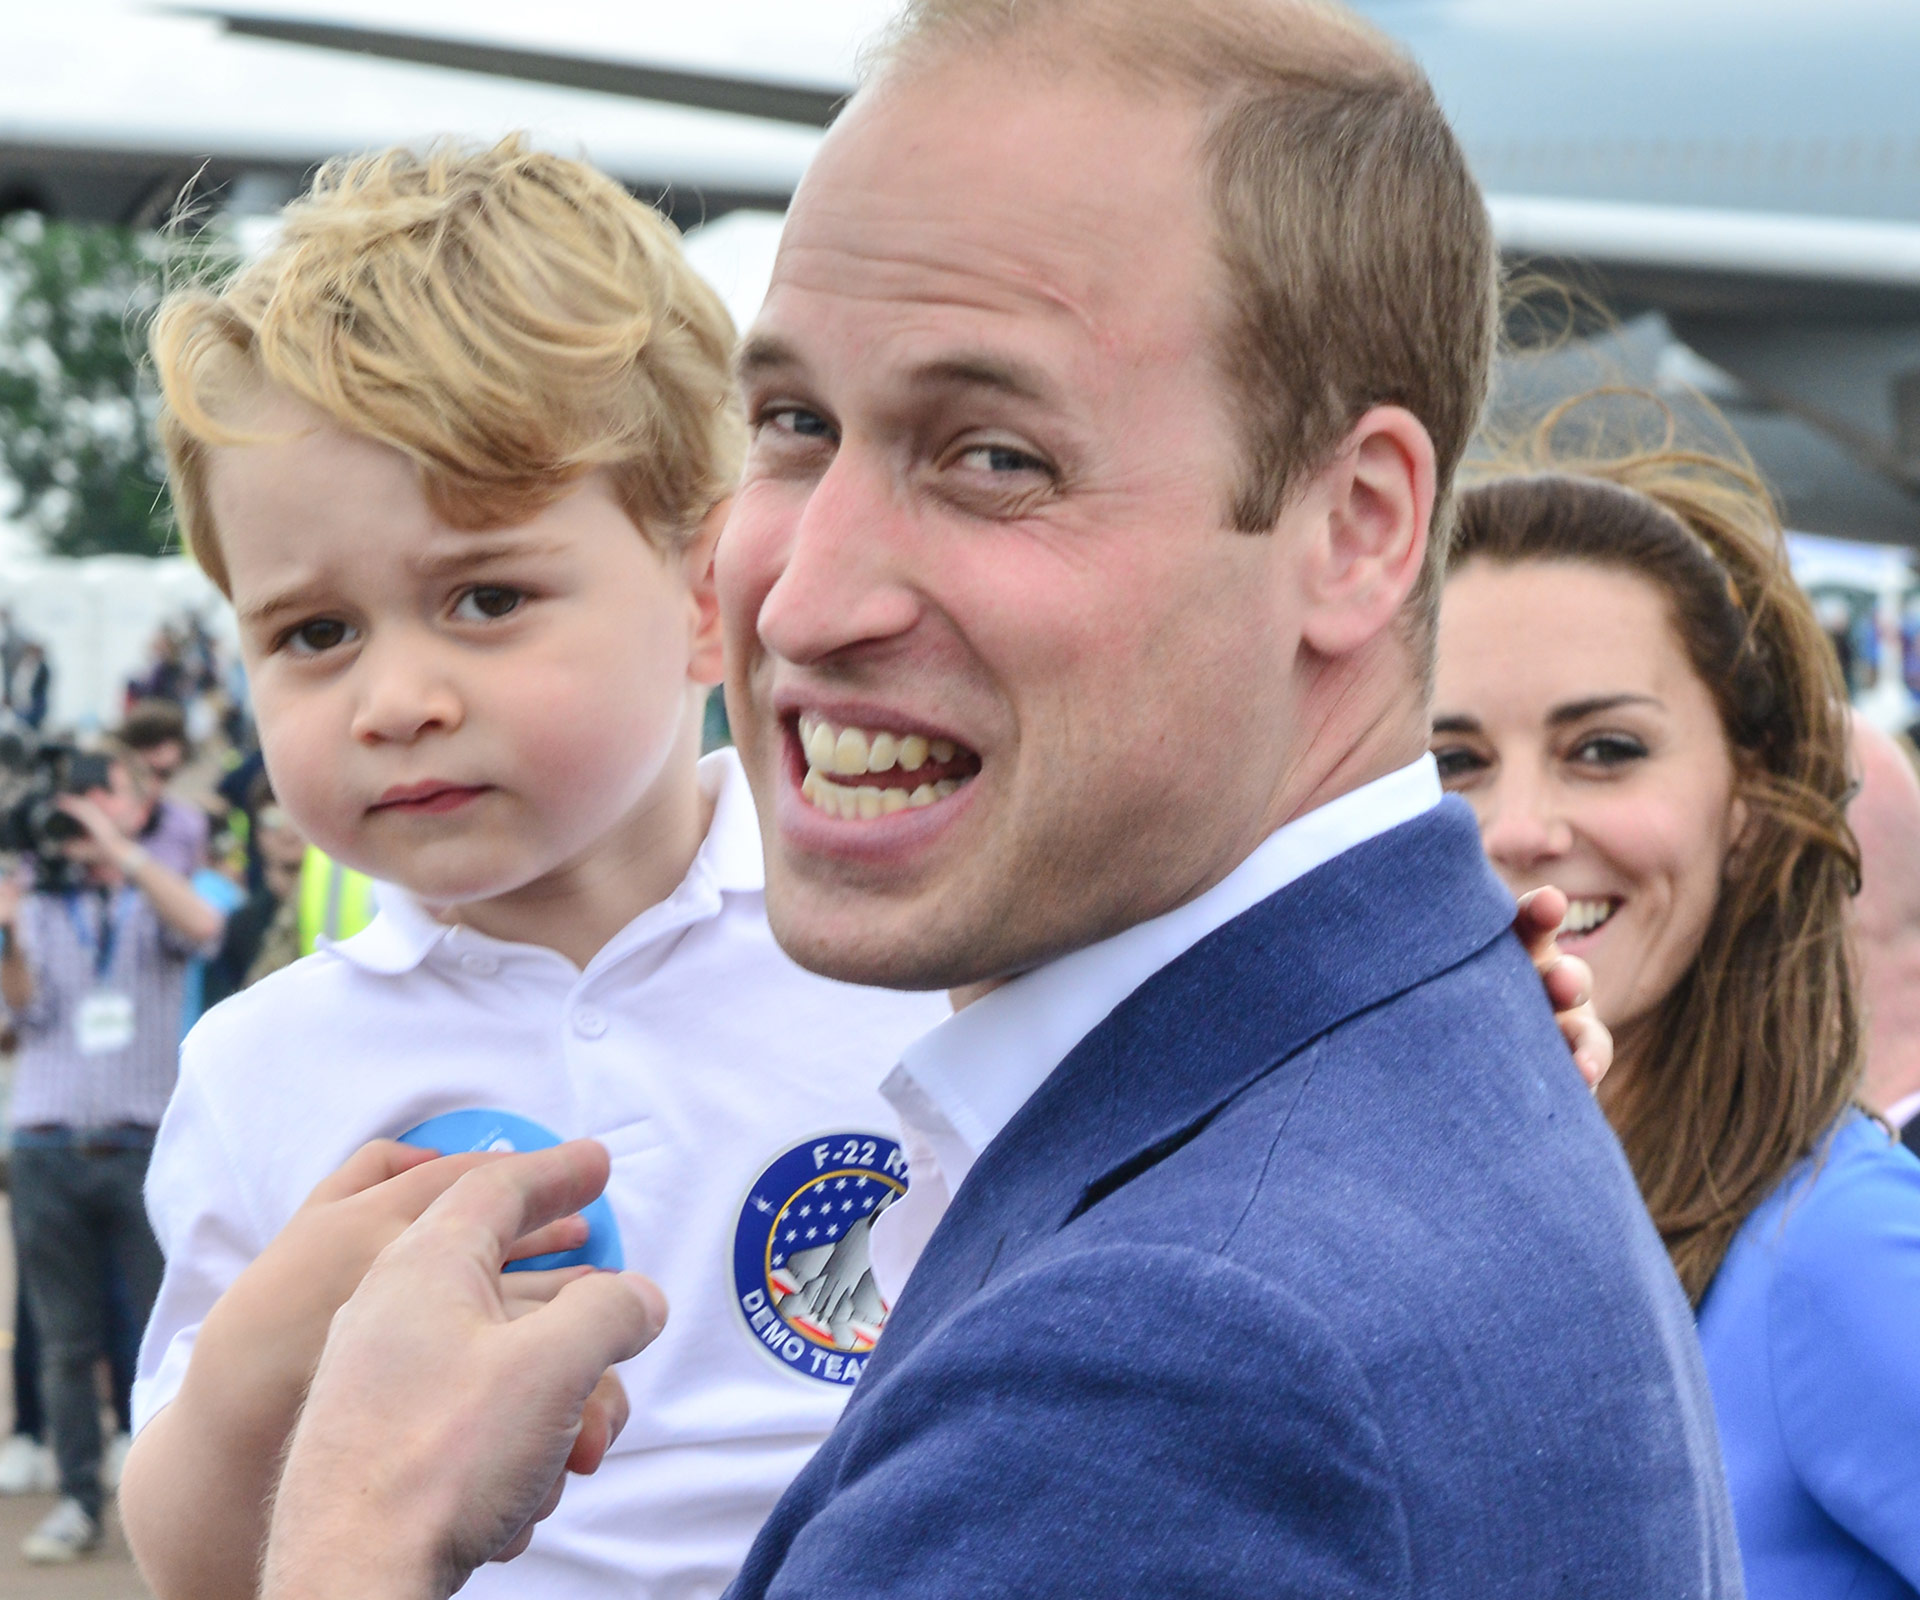 Prince George is literally Prince William’s spitting image… Like all the time